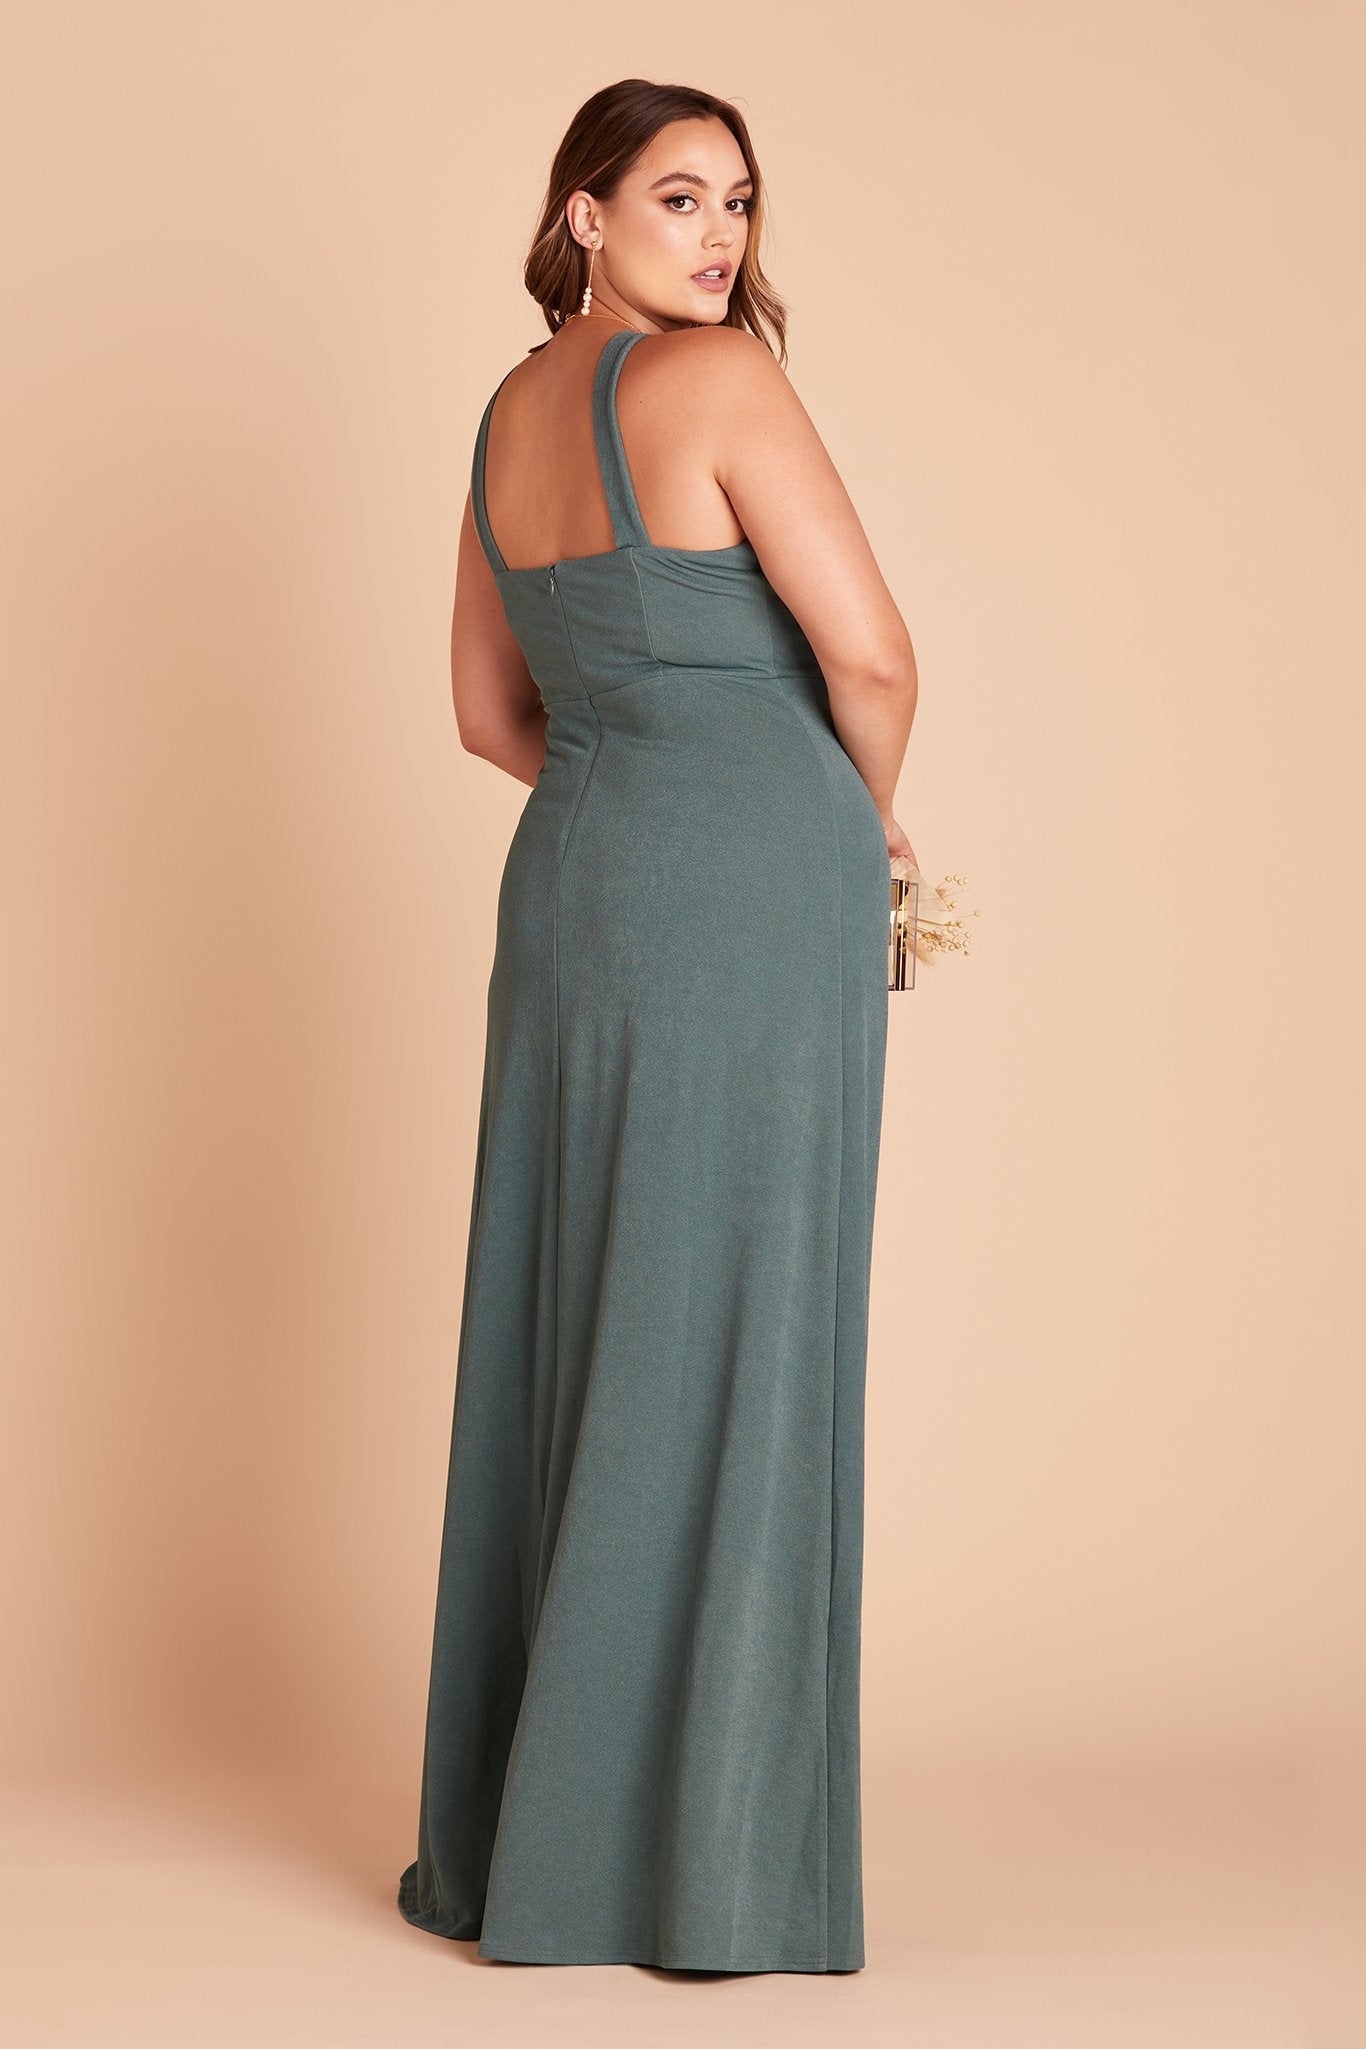 Gene plus size bridesmaid dress with slit in sea glass green crepe by Birdy Grey, back view